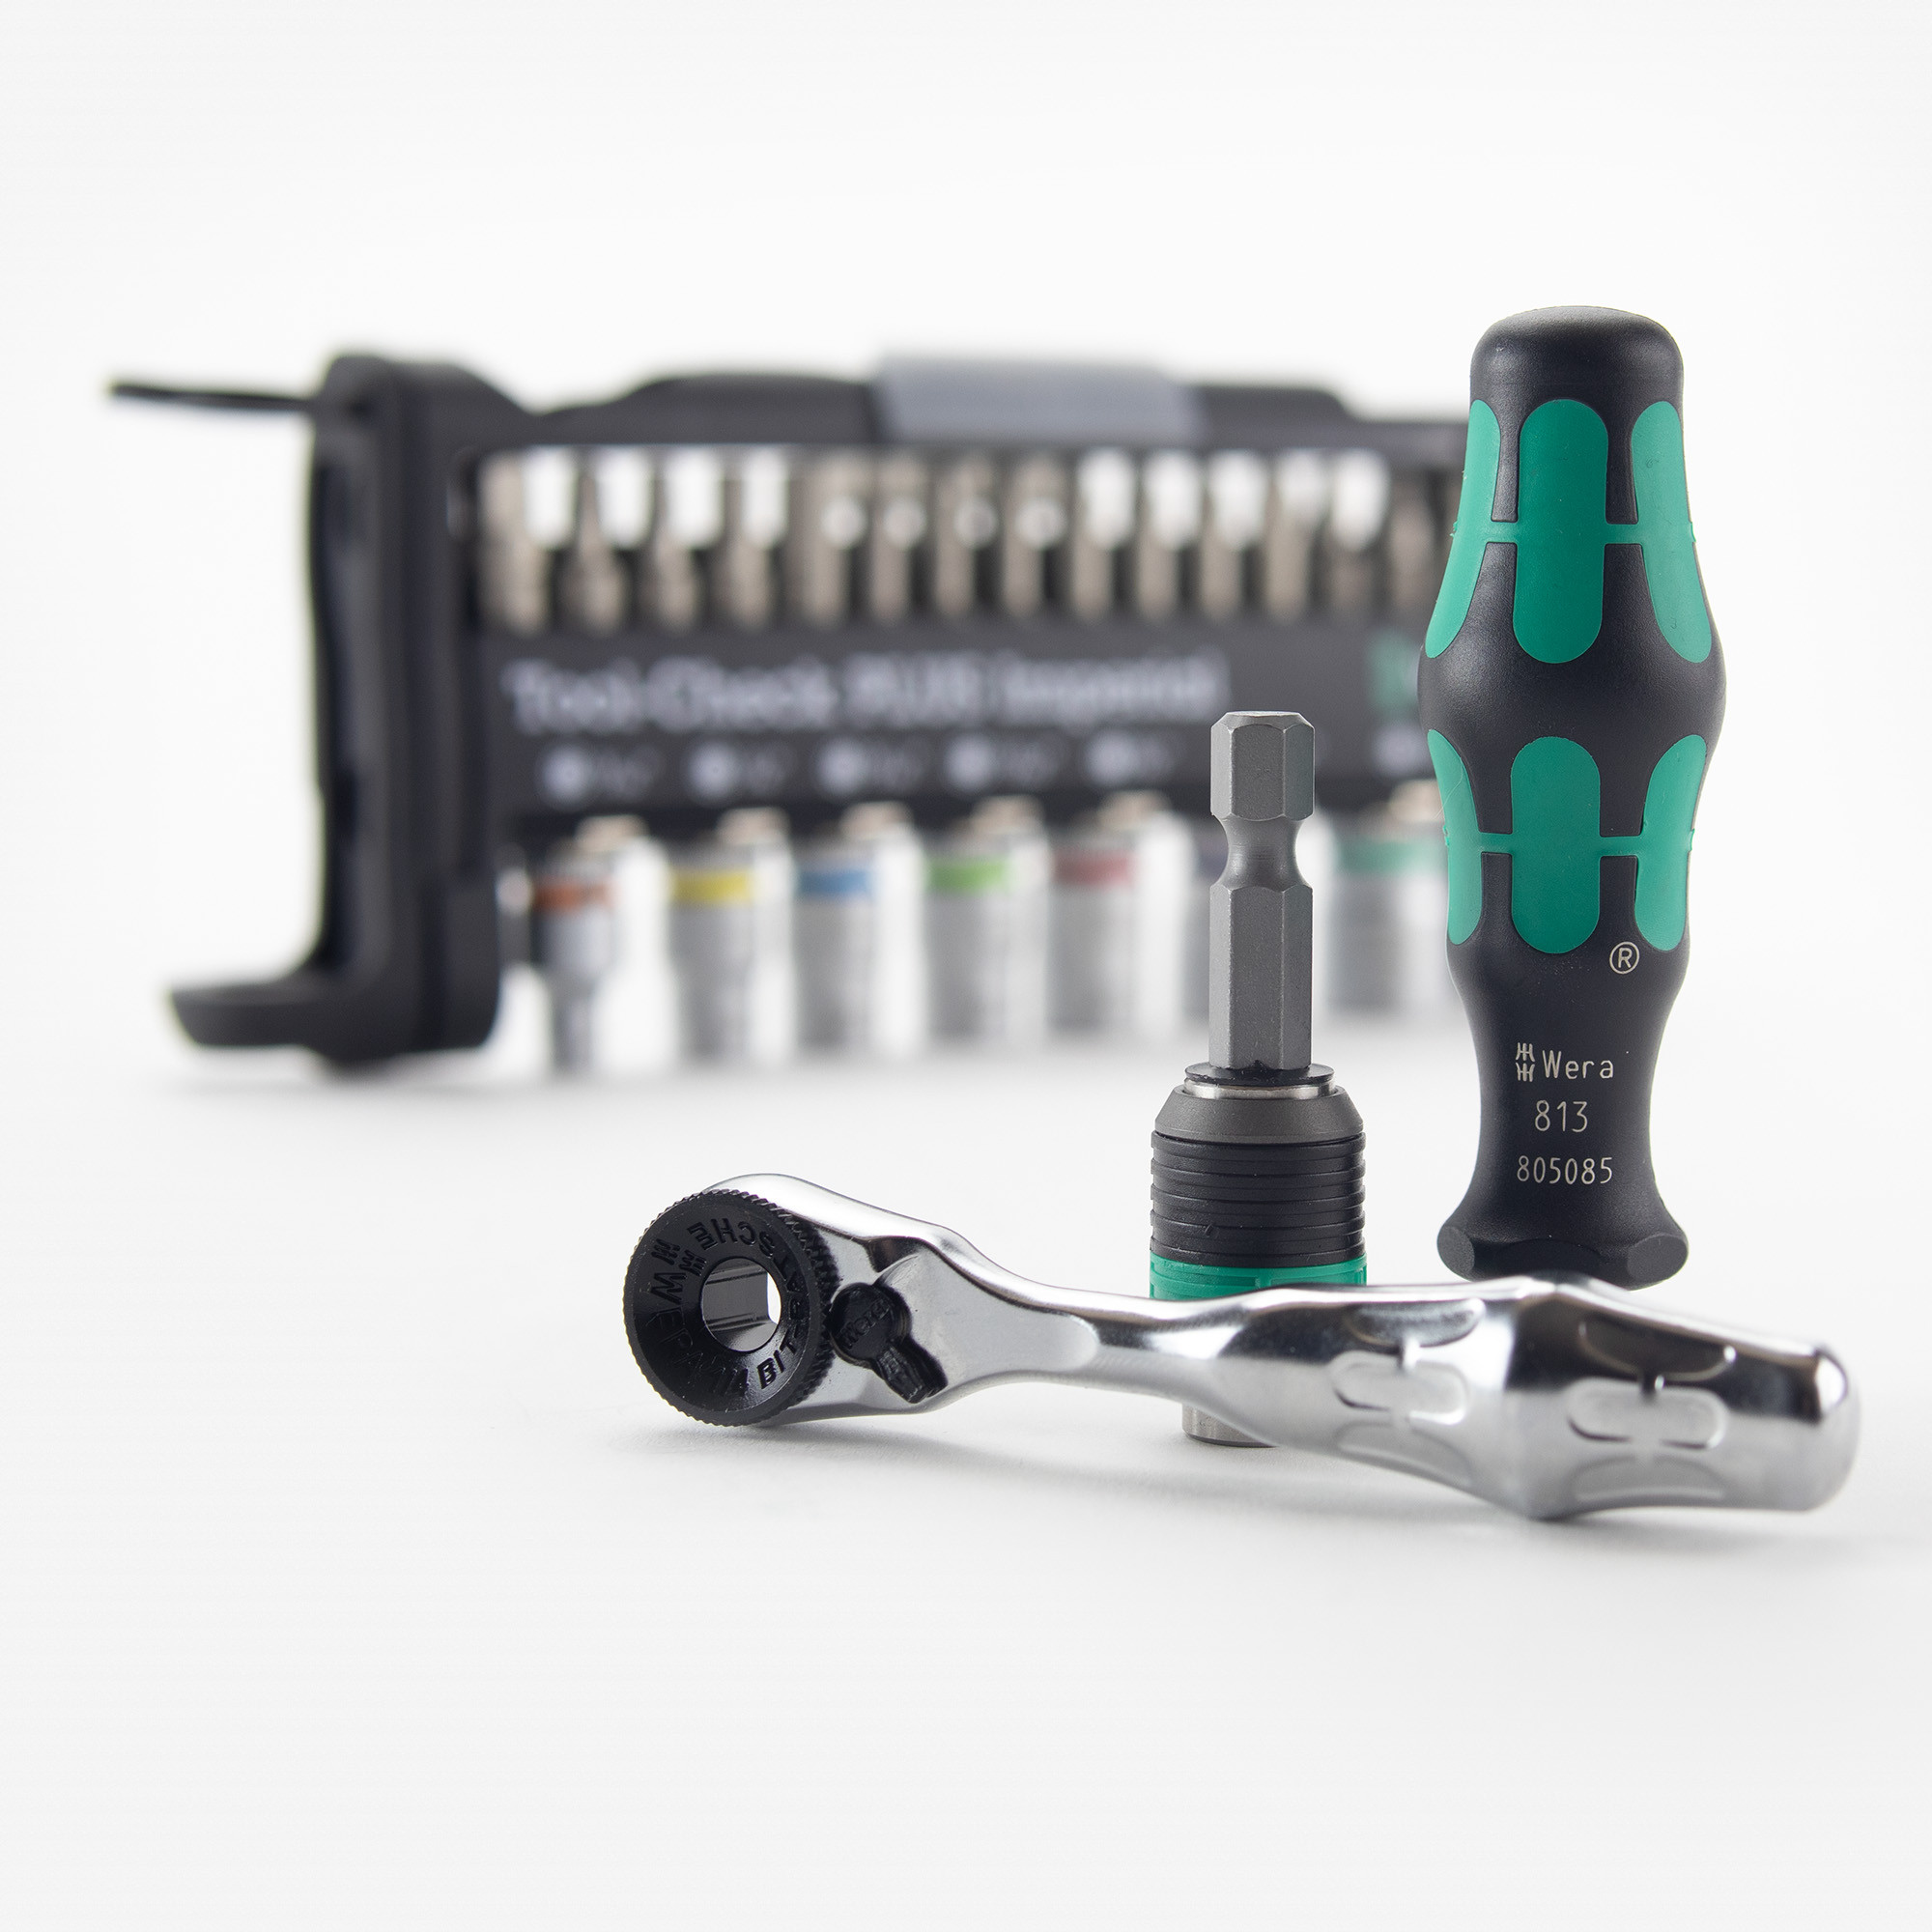 Wera Tools 056491 Tool-Check Plus Bit Ratchet Set with Sockets - Imperial